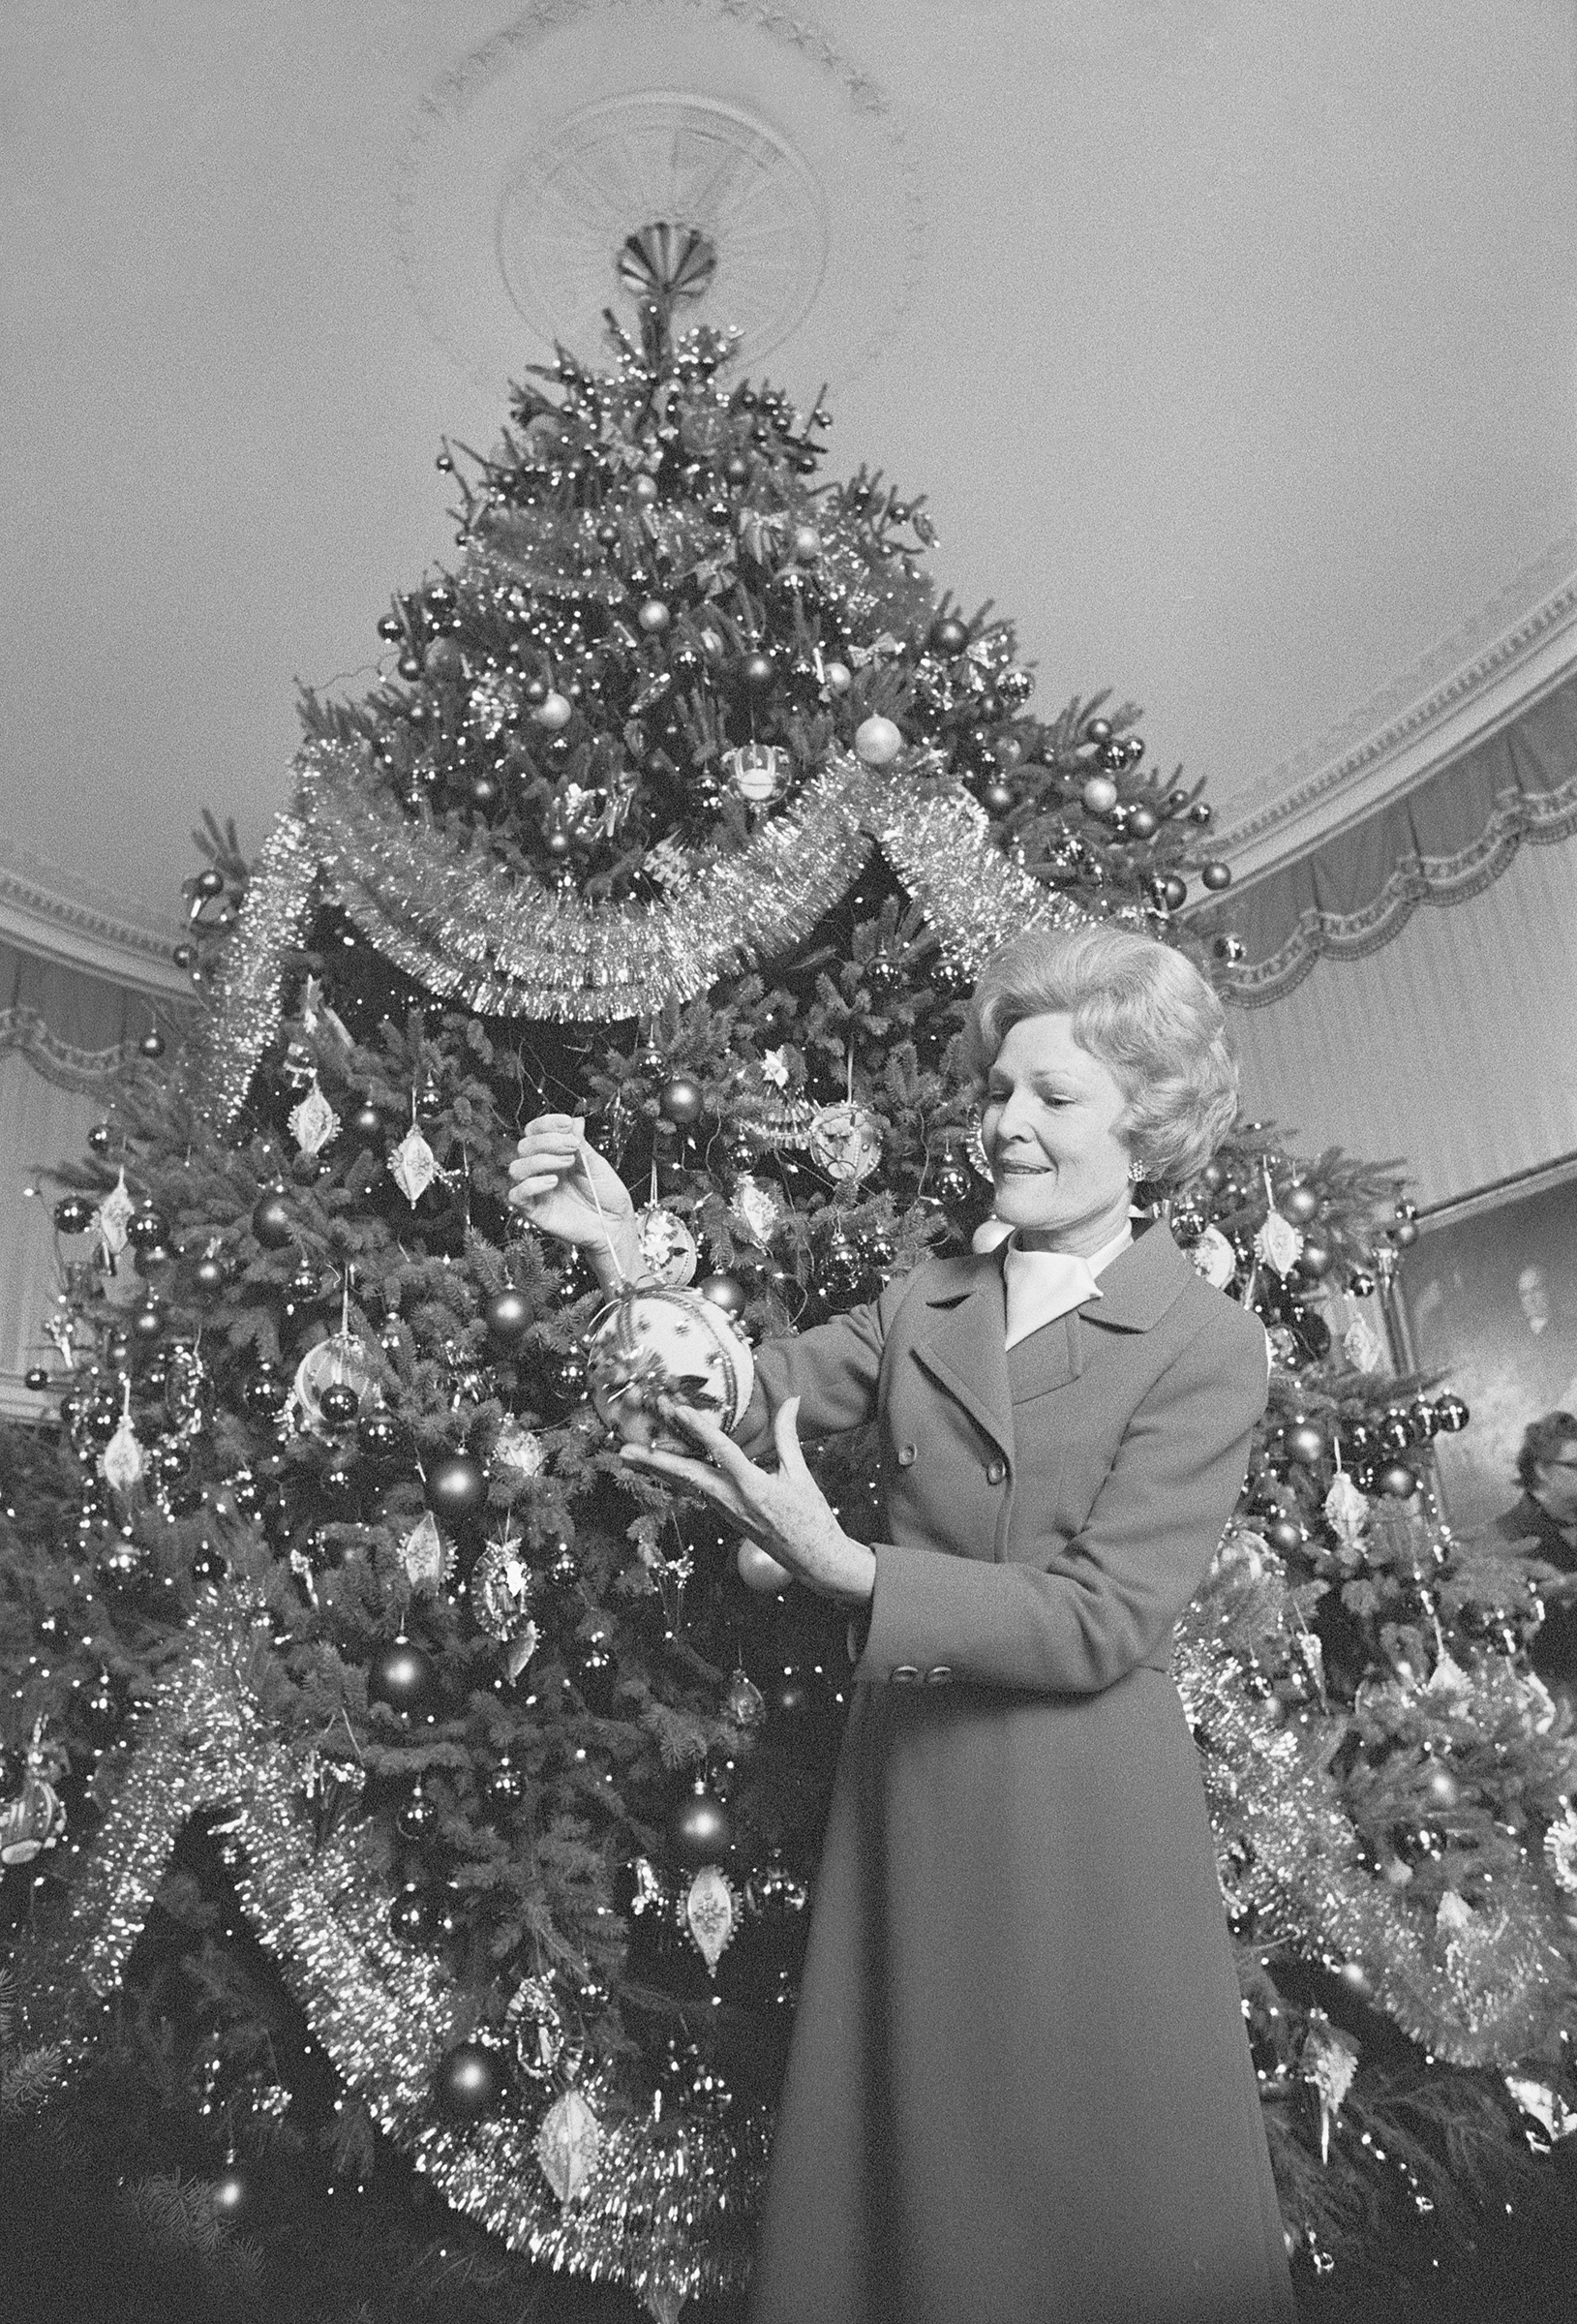 Here's First Lady Patricia Nixon decorating the Christmas Tree at the White House in Washington D.C. on Dec. 14, 1970. Burke says Melania drew inspiration from this year's approach. (Wally McNamee—Corbis via Getty Images)